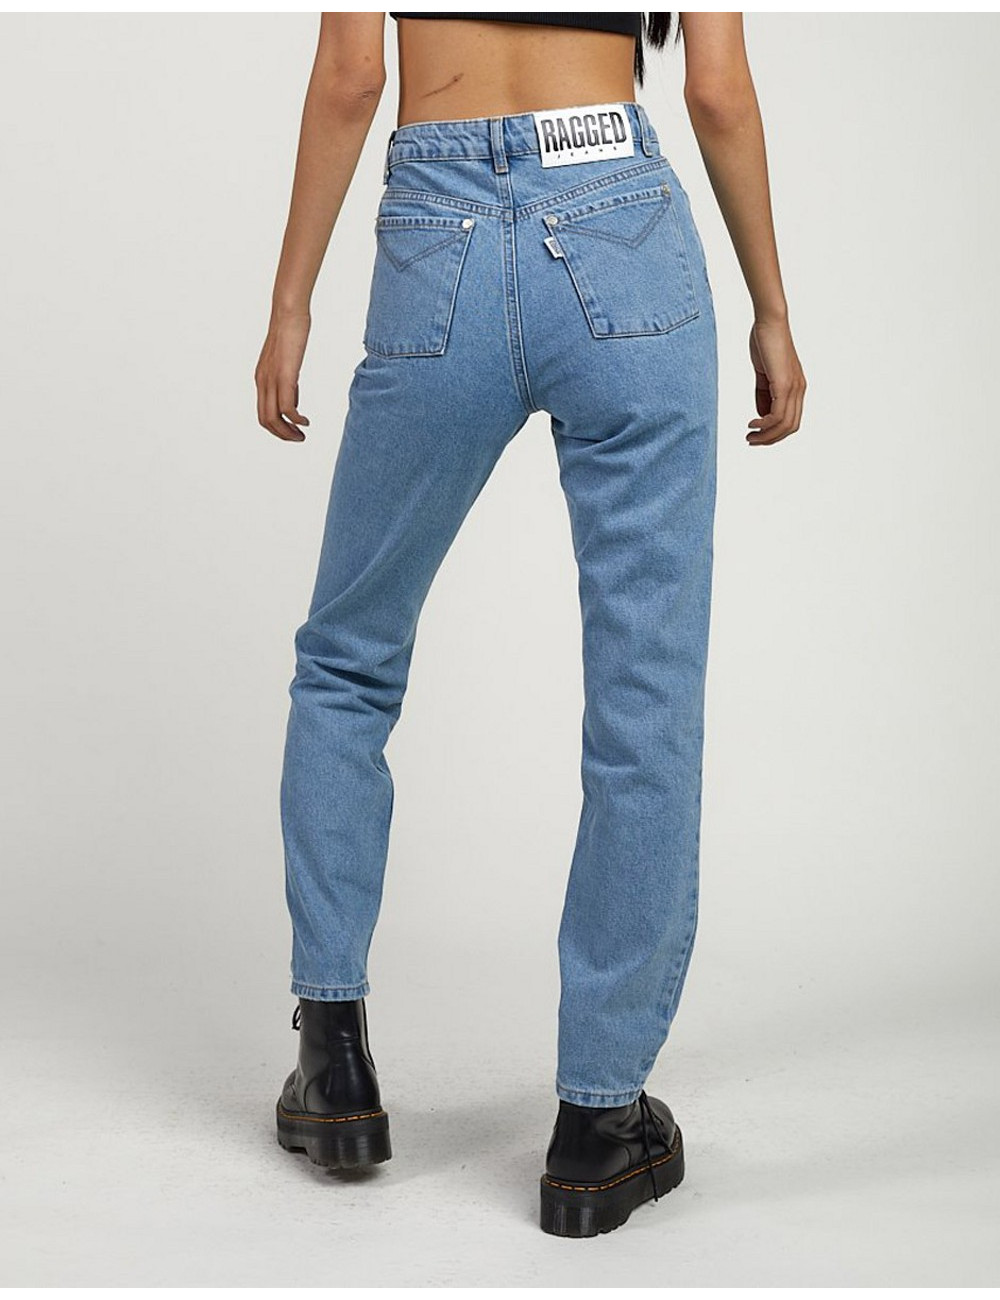 The Ragged Priest mom jeans...